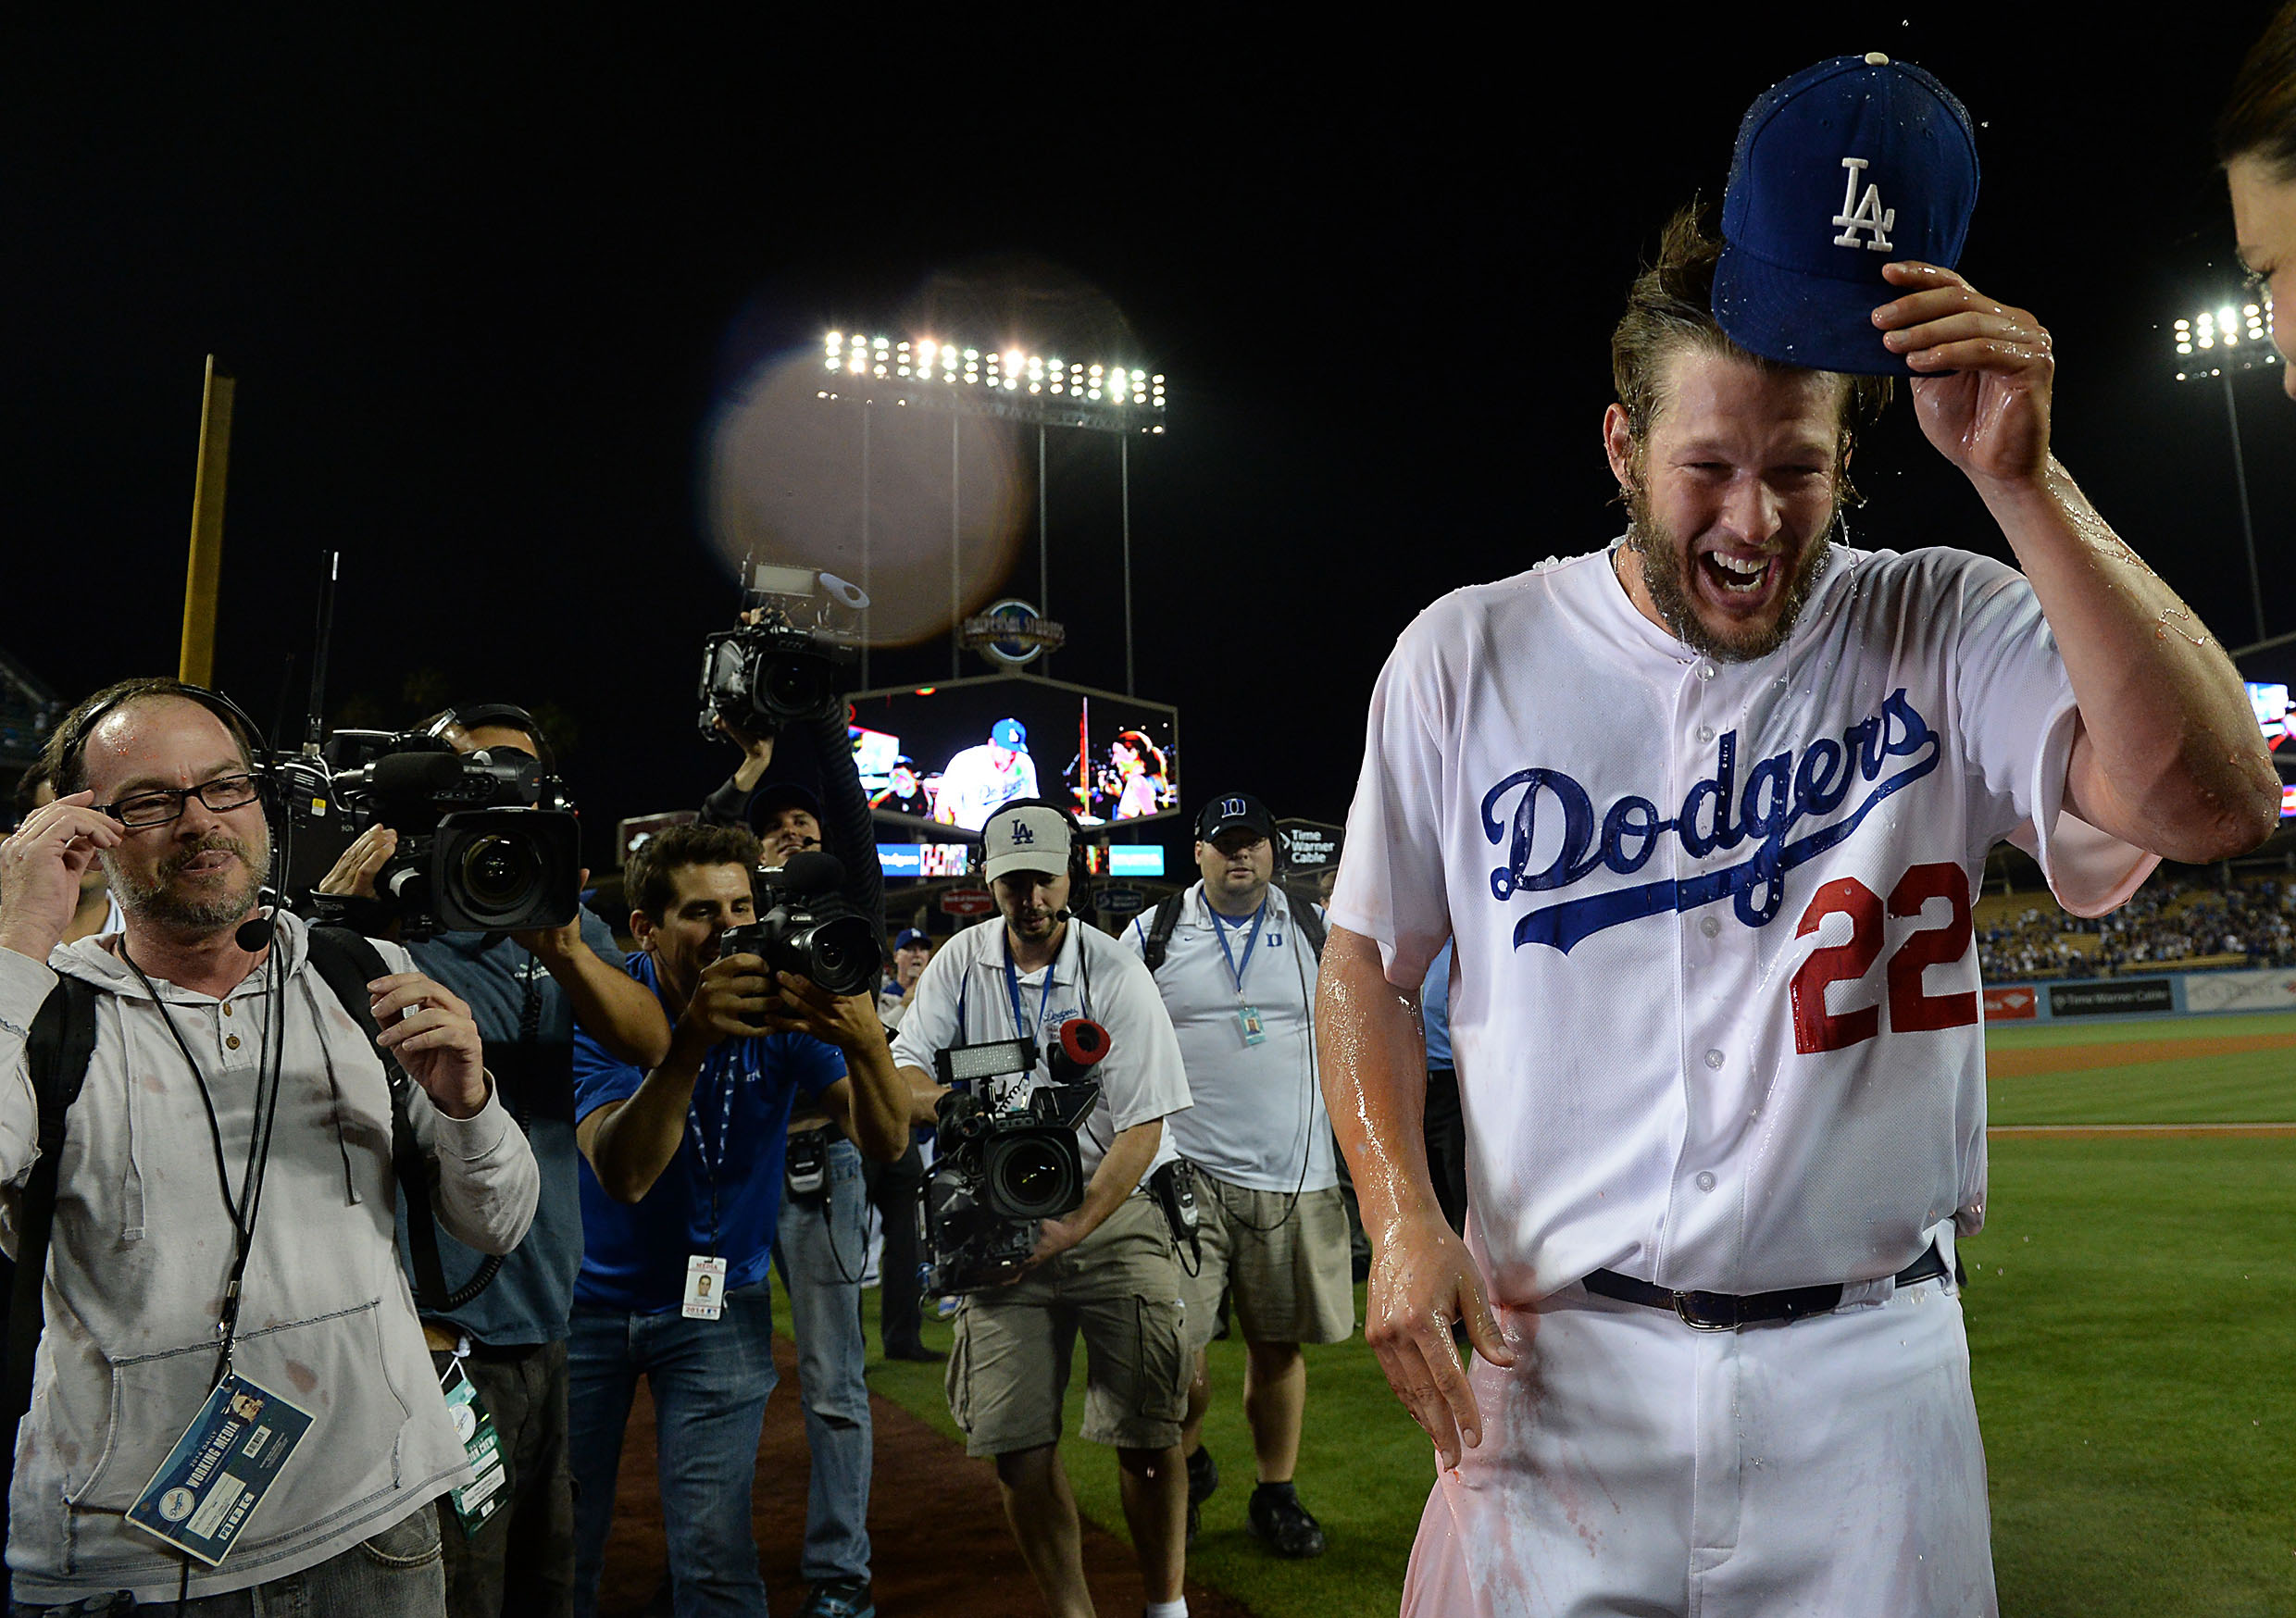 Los Angeles Dodgers starting pitcher Clayton Kershaw (22) reacts after being dunked with Powerade as he gives an interview following his no hitter against the Colorado Rockies at Dodger Stadium. Dodgers won 8-0. (USA Today Sports/Reuters)